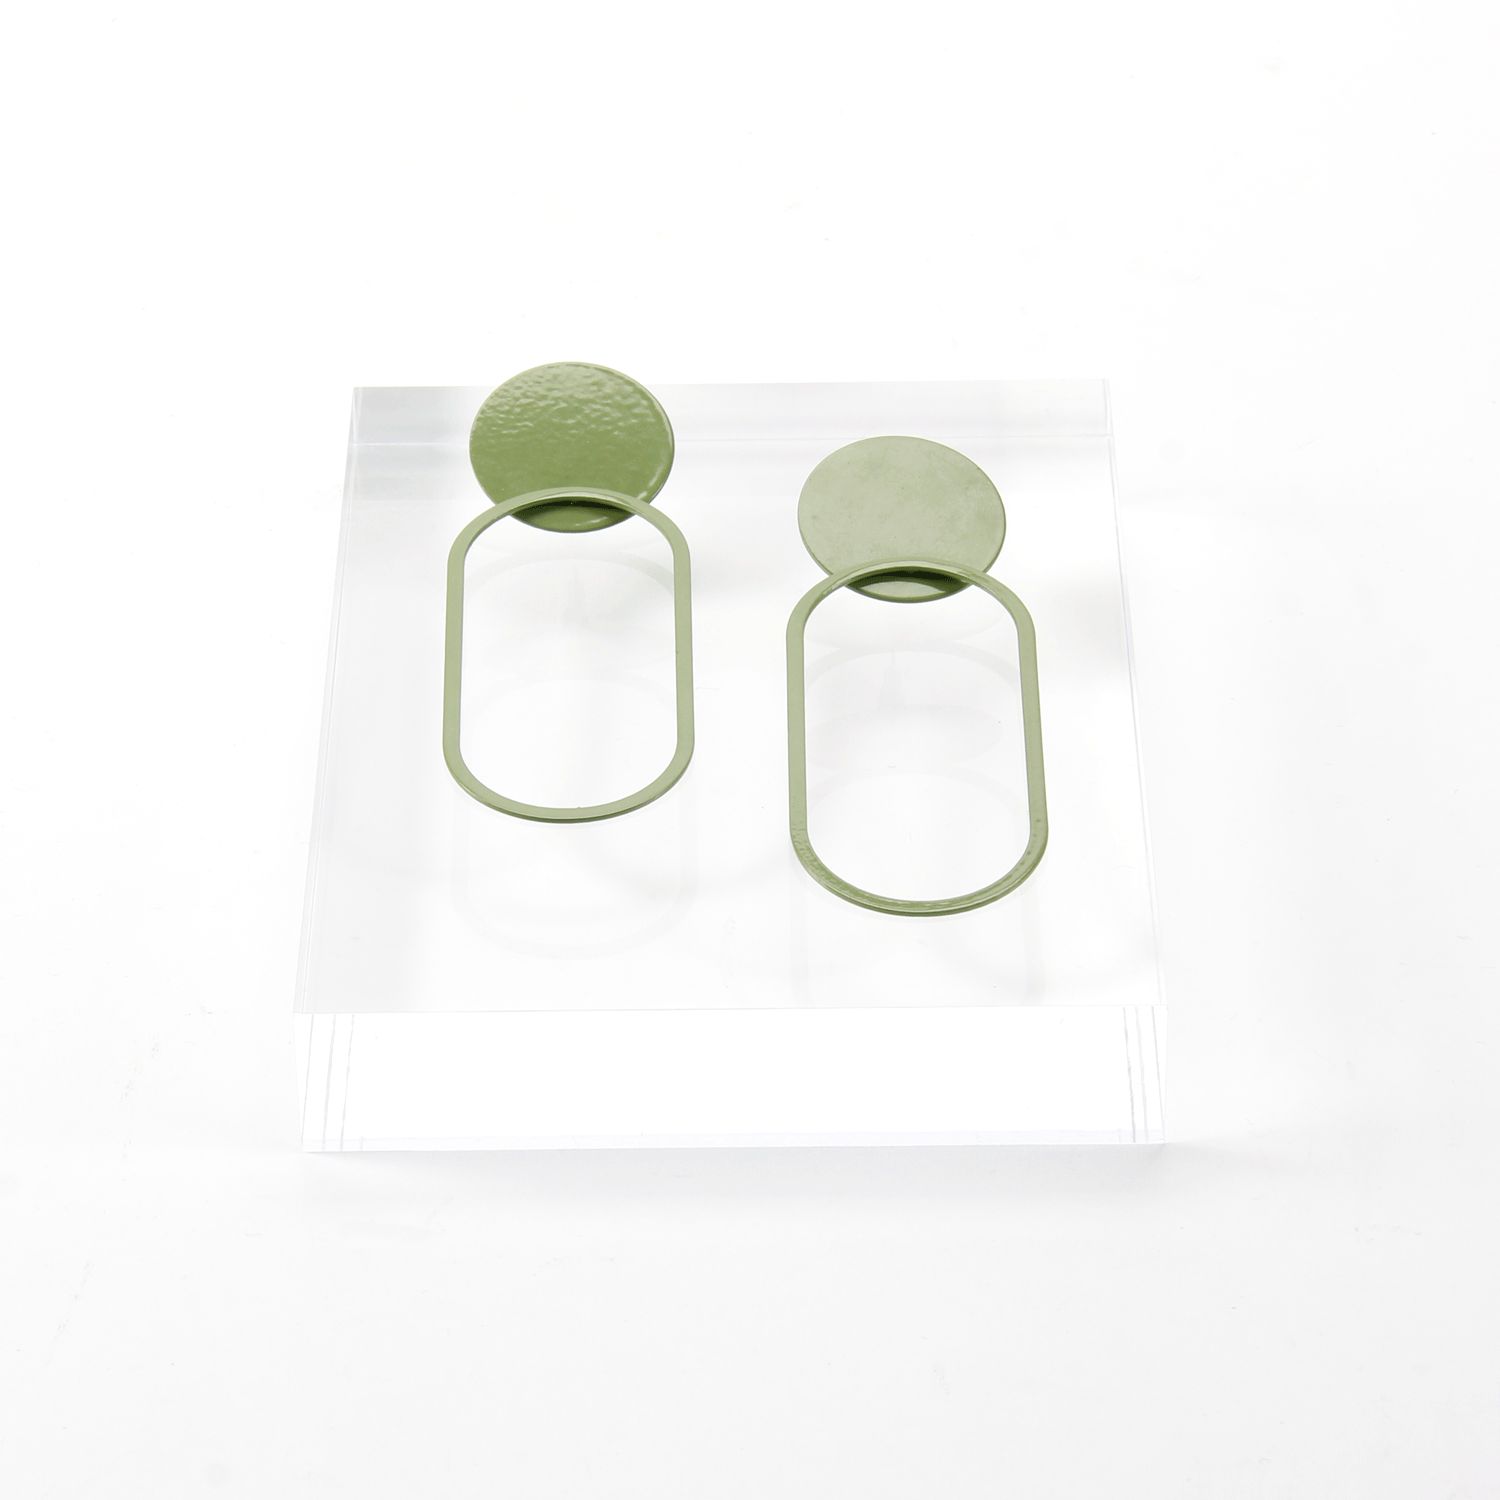 Days of August: Monaco Earrings in Avo Green Product Image 1 of 2